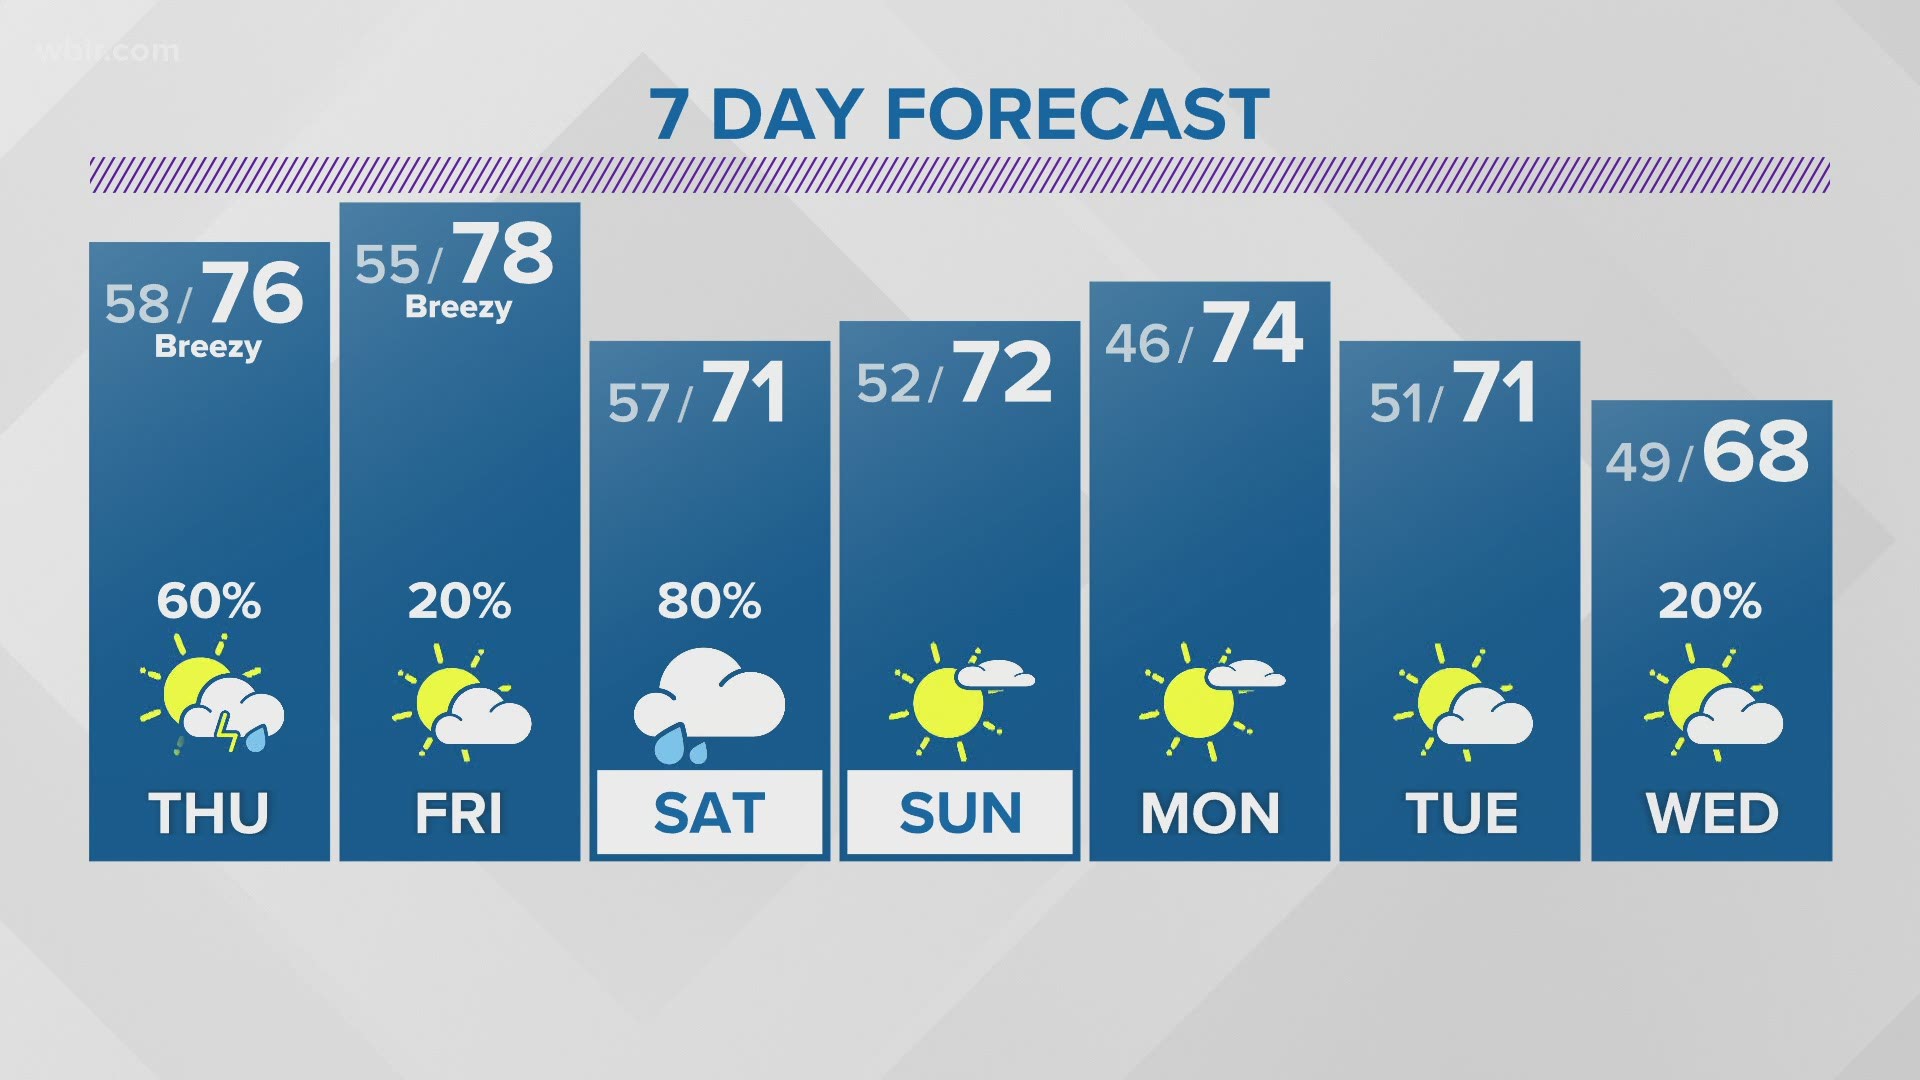 Warm weather to round out the week, then higher rain chances to start the weekend on Saturday.